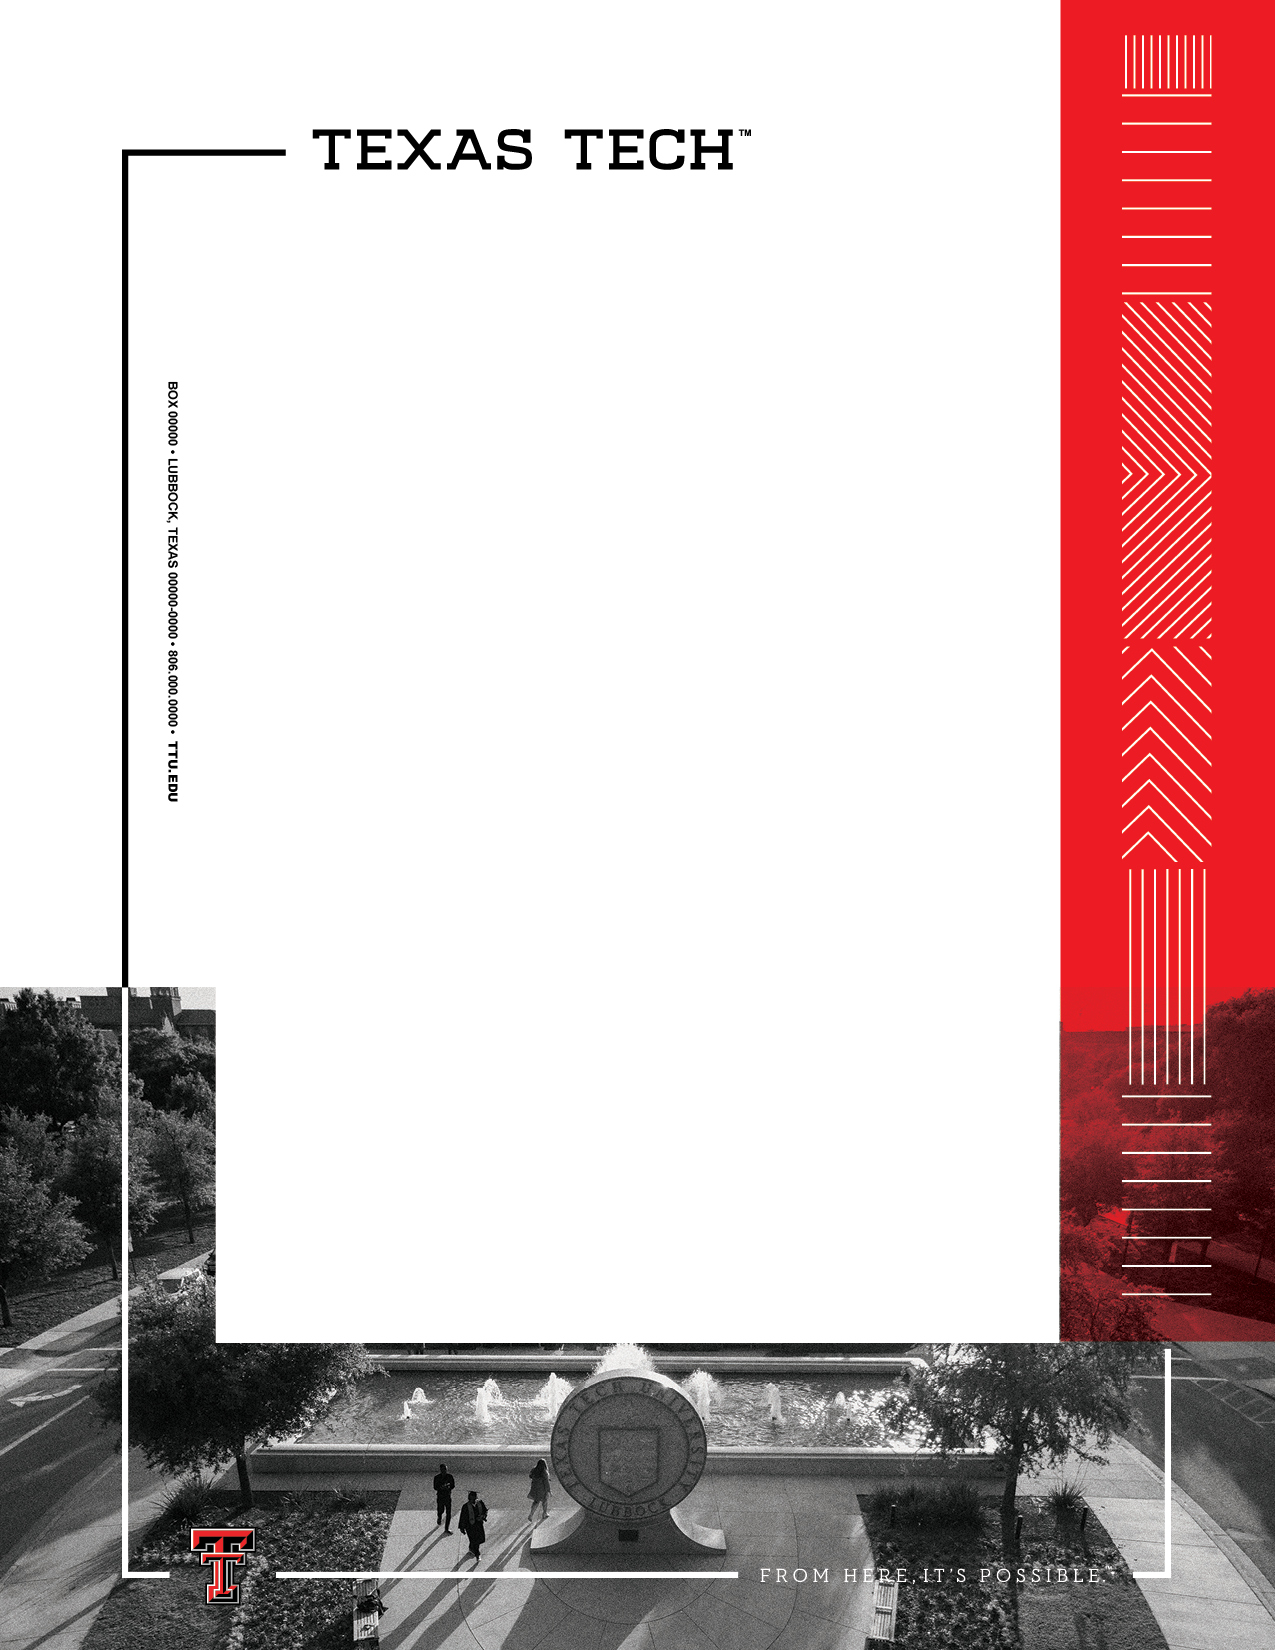 The specialty letterhead features a black and white background image of campus            on the bottom half of the page. On the right side, there is a red decorative            rectangle overlaid with white decorative lines. There is a bold decorative line            anchoring from the top left corner next to the Texas Tech logo and wrapping around            the page counterclockwise. It leads to the bottom left corner to a Double T and            continues to a From Here, It's Possible logo ending on the bottom right corner.            The letter is set in sans-serif text.